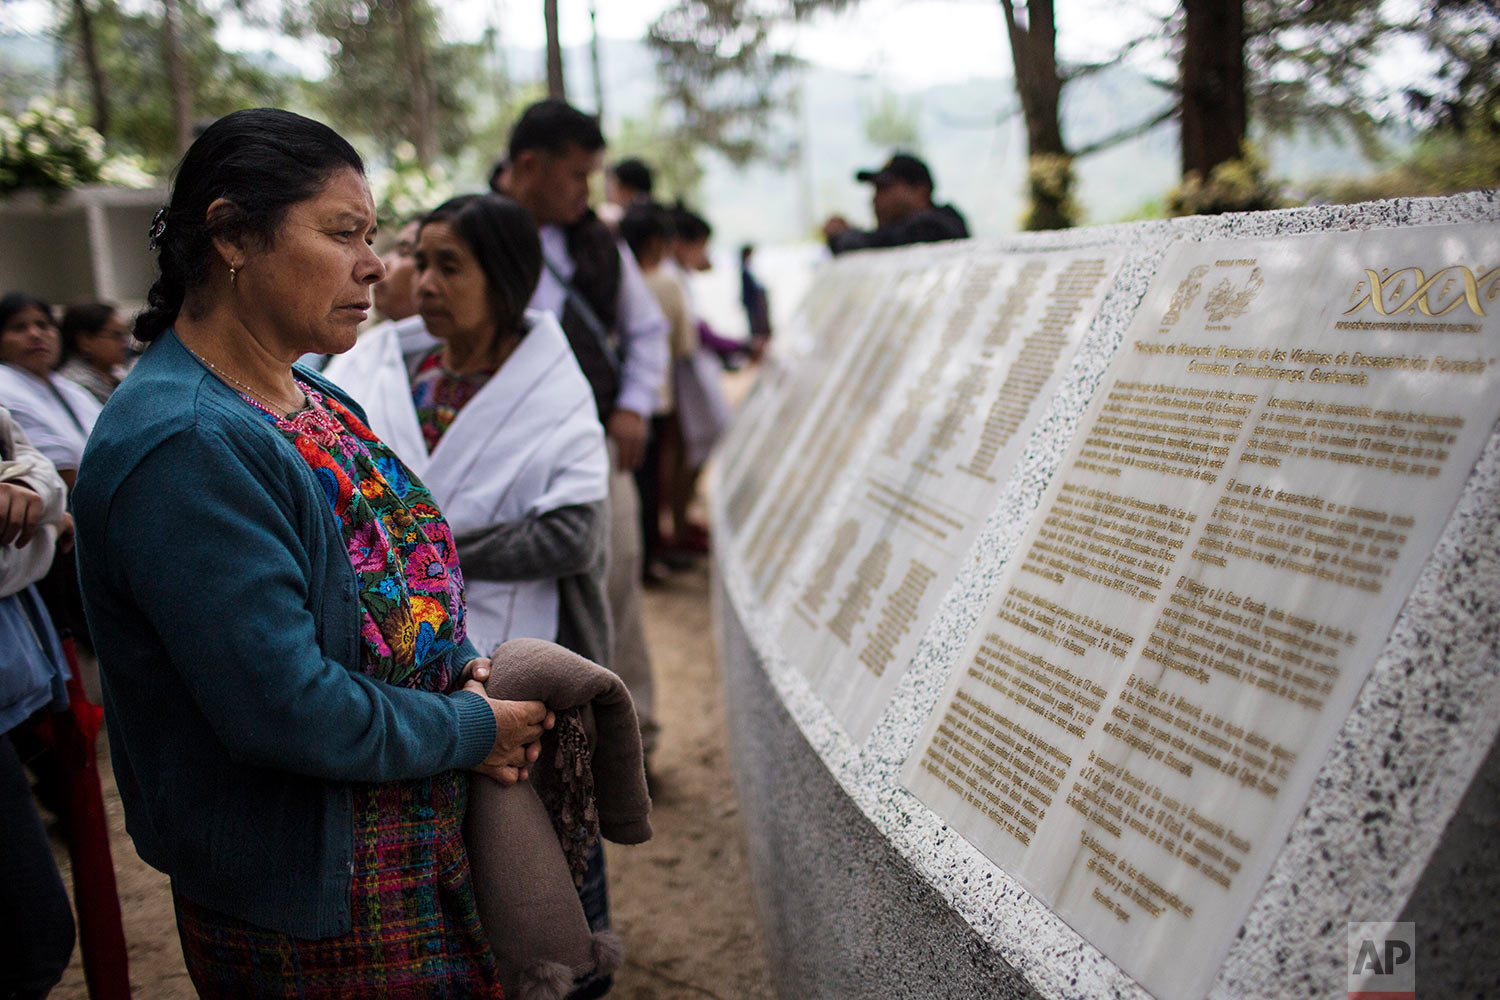  In this June 21, 2018 photo, a woman reads the names of people who disappeared during the civil war, at the site where a military camp once operated and where the 172 bodies were unearthed in San Juan Comalapa, Guatemala. (AP Photo/Rodrigo Abd) 